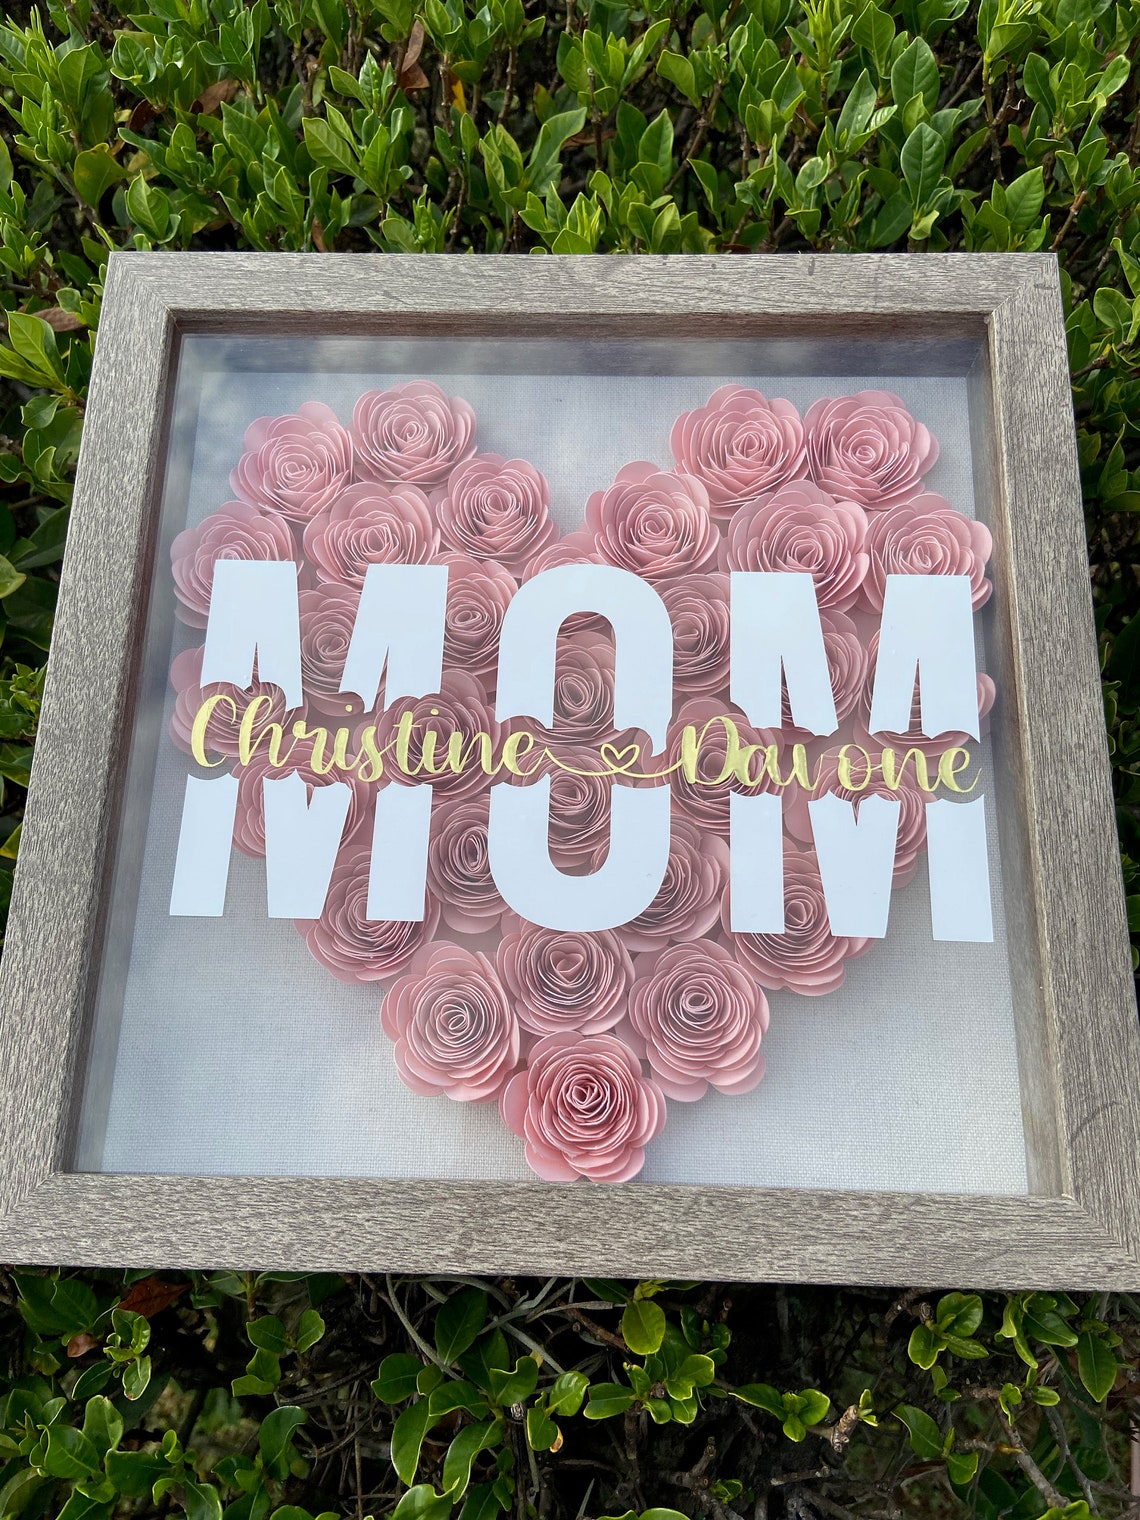 Mother's Day Shadow Box Gift for her Rolled Roses | Etsy